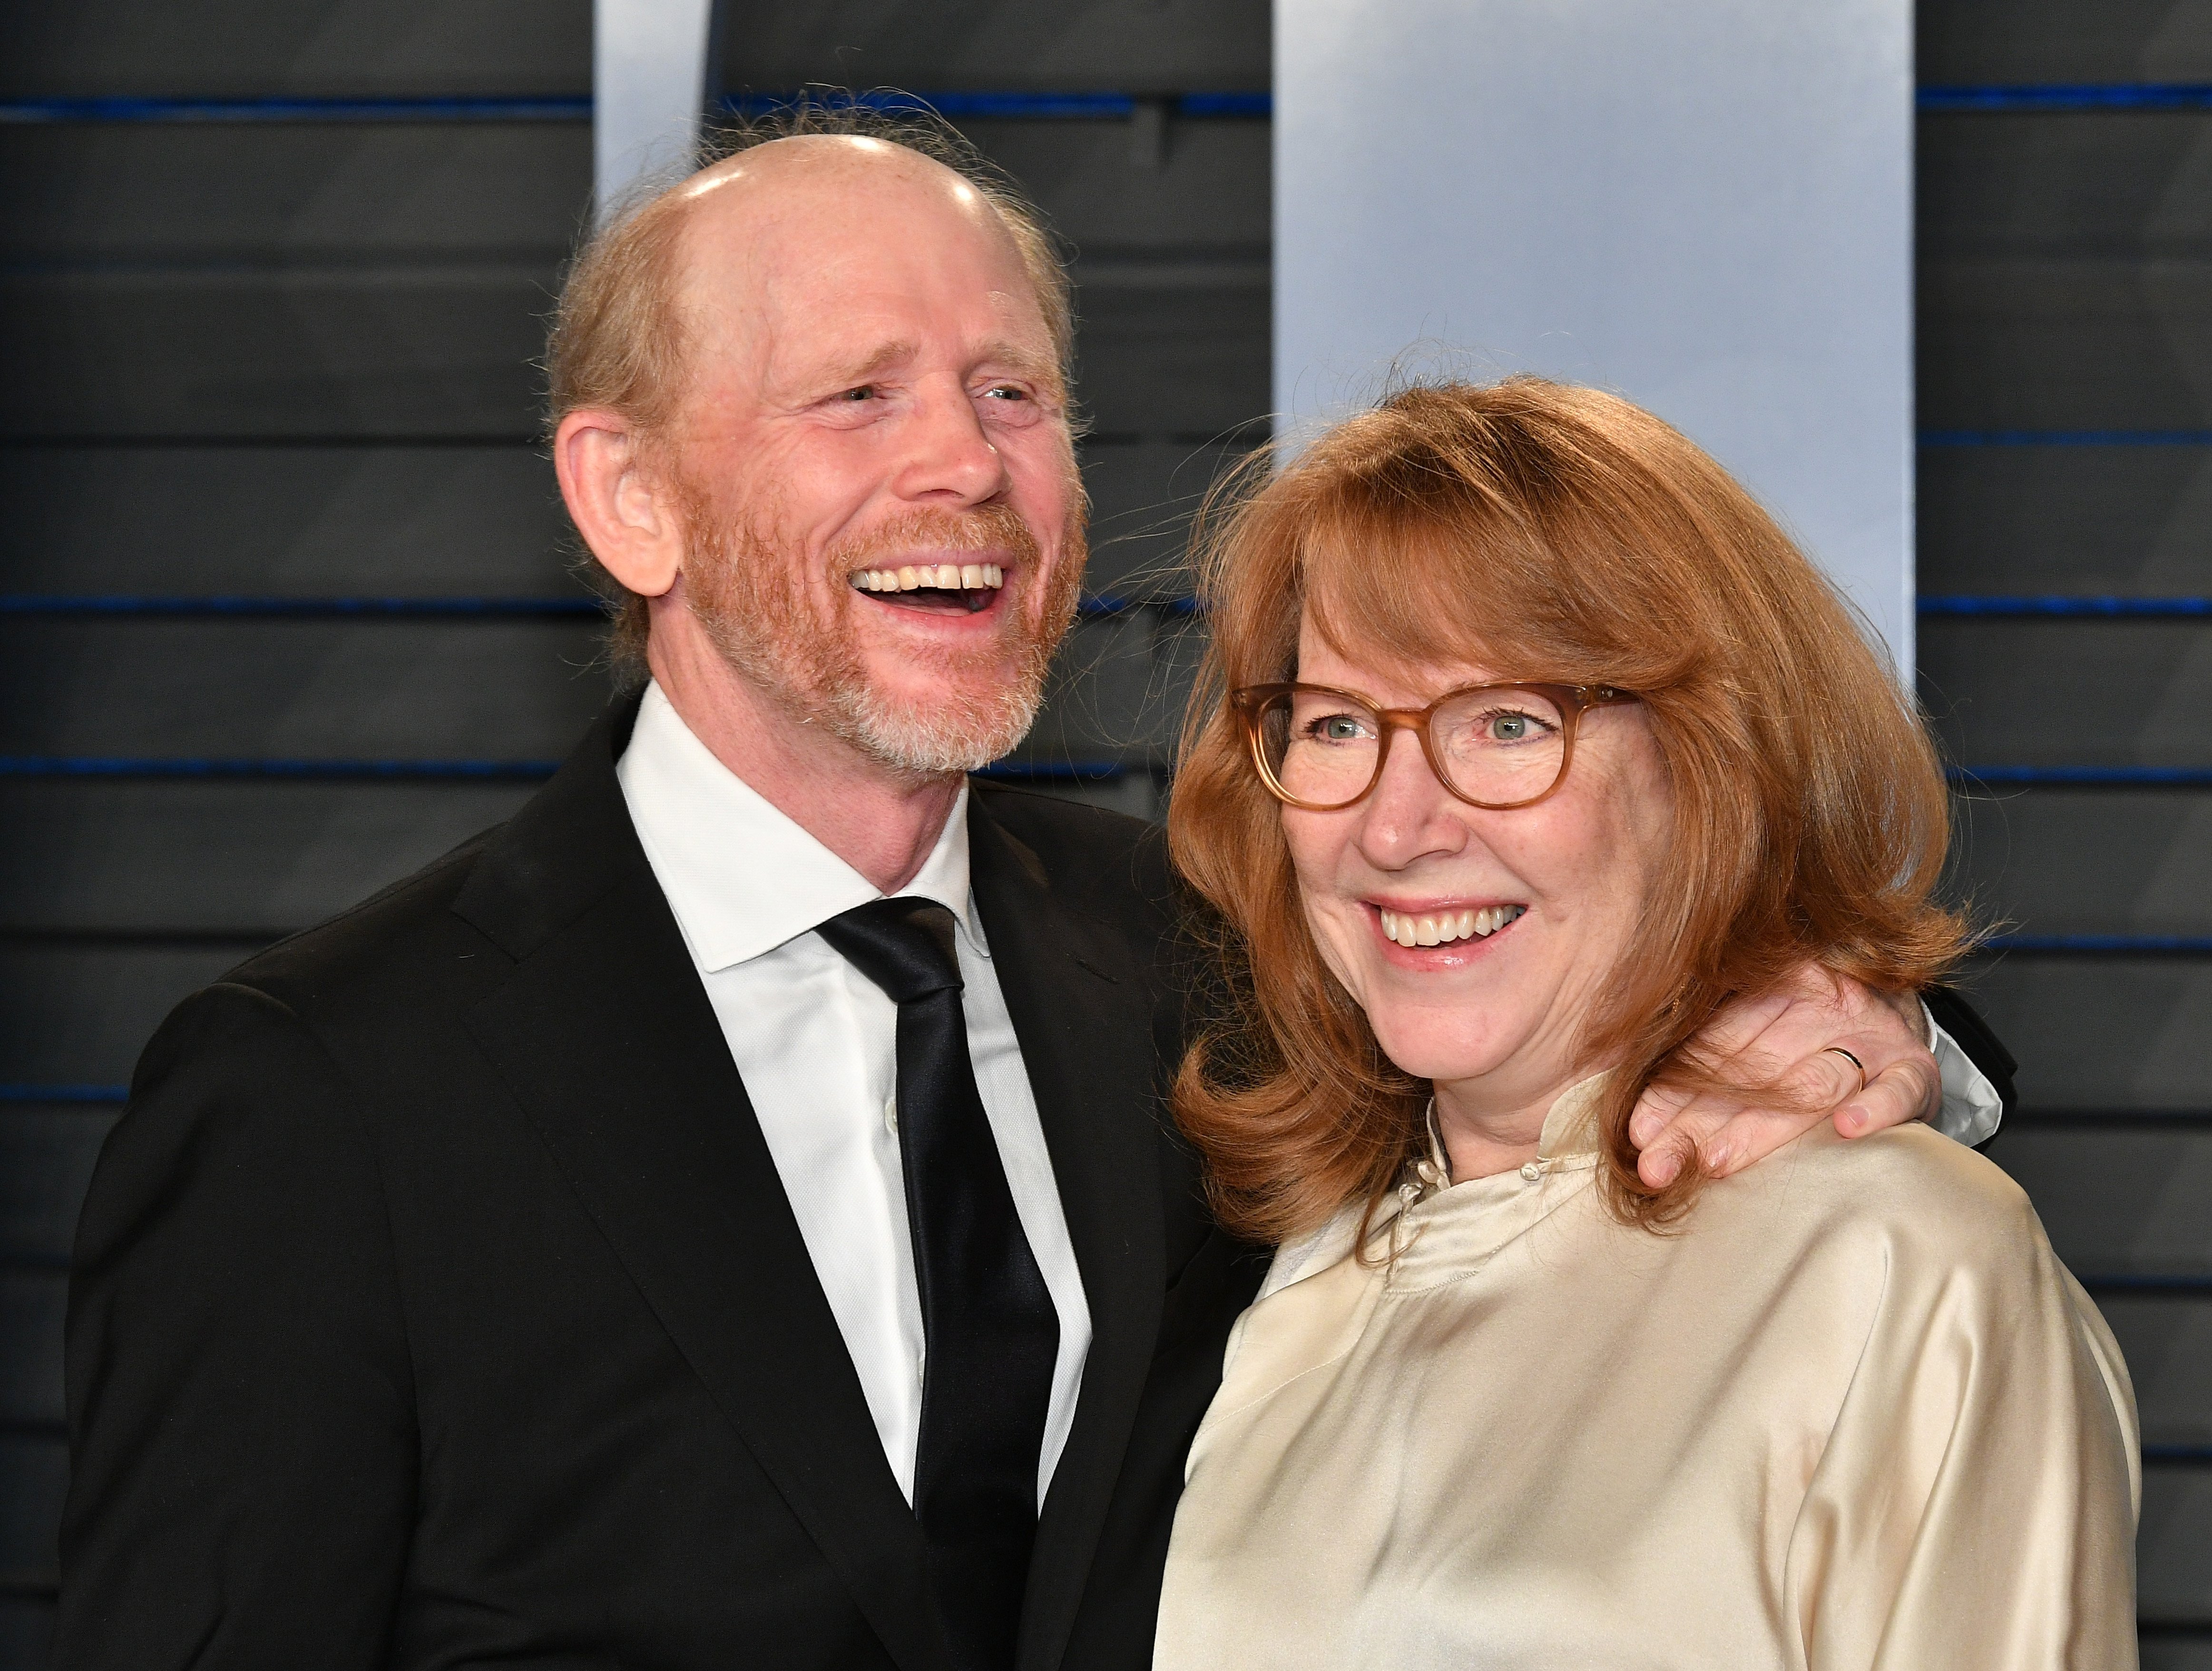 Ron Howard and Cheryl Howard during the 2018 Vanity Fair Oscar Party hosted by Radhika Jones at Wallis Annenberg Center for the Performing Arts on March 4, 2018 in Beverly Hills, California. | Source: Getty Images